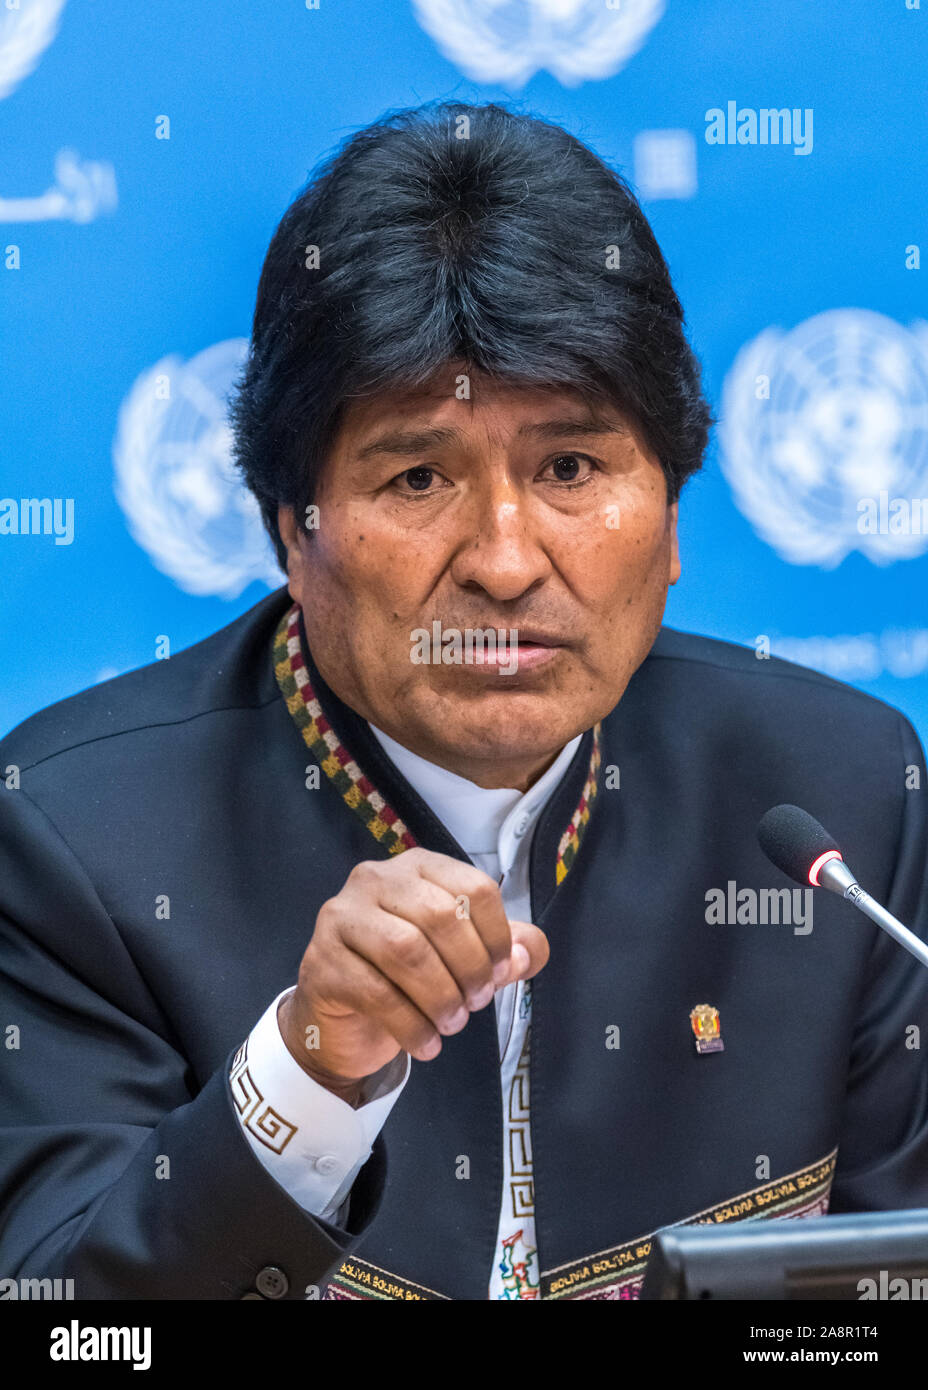 New York, USA,  22 September 2016.  Bolivian President Evo Morales resigned on November 10, 2019 after the military called for him to do so and allies abandoned him following a disputed election. Morales is seen at a press conference while attending the United Nations General Assembly in New York city in 2016.   Credit: Enrique Shore/Alamy Stock Photo Stock Photo